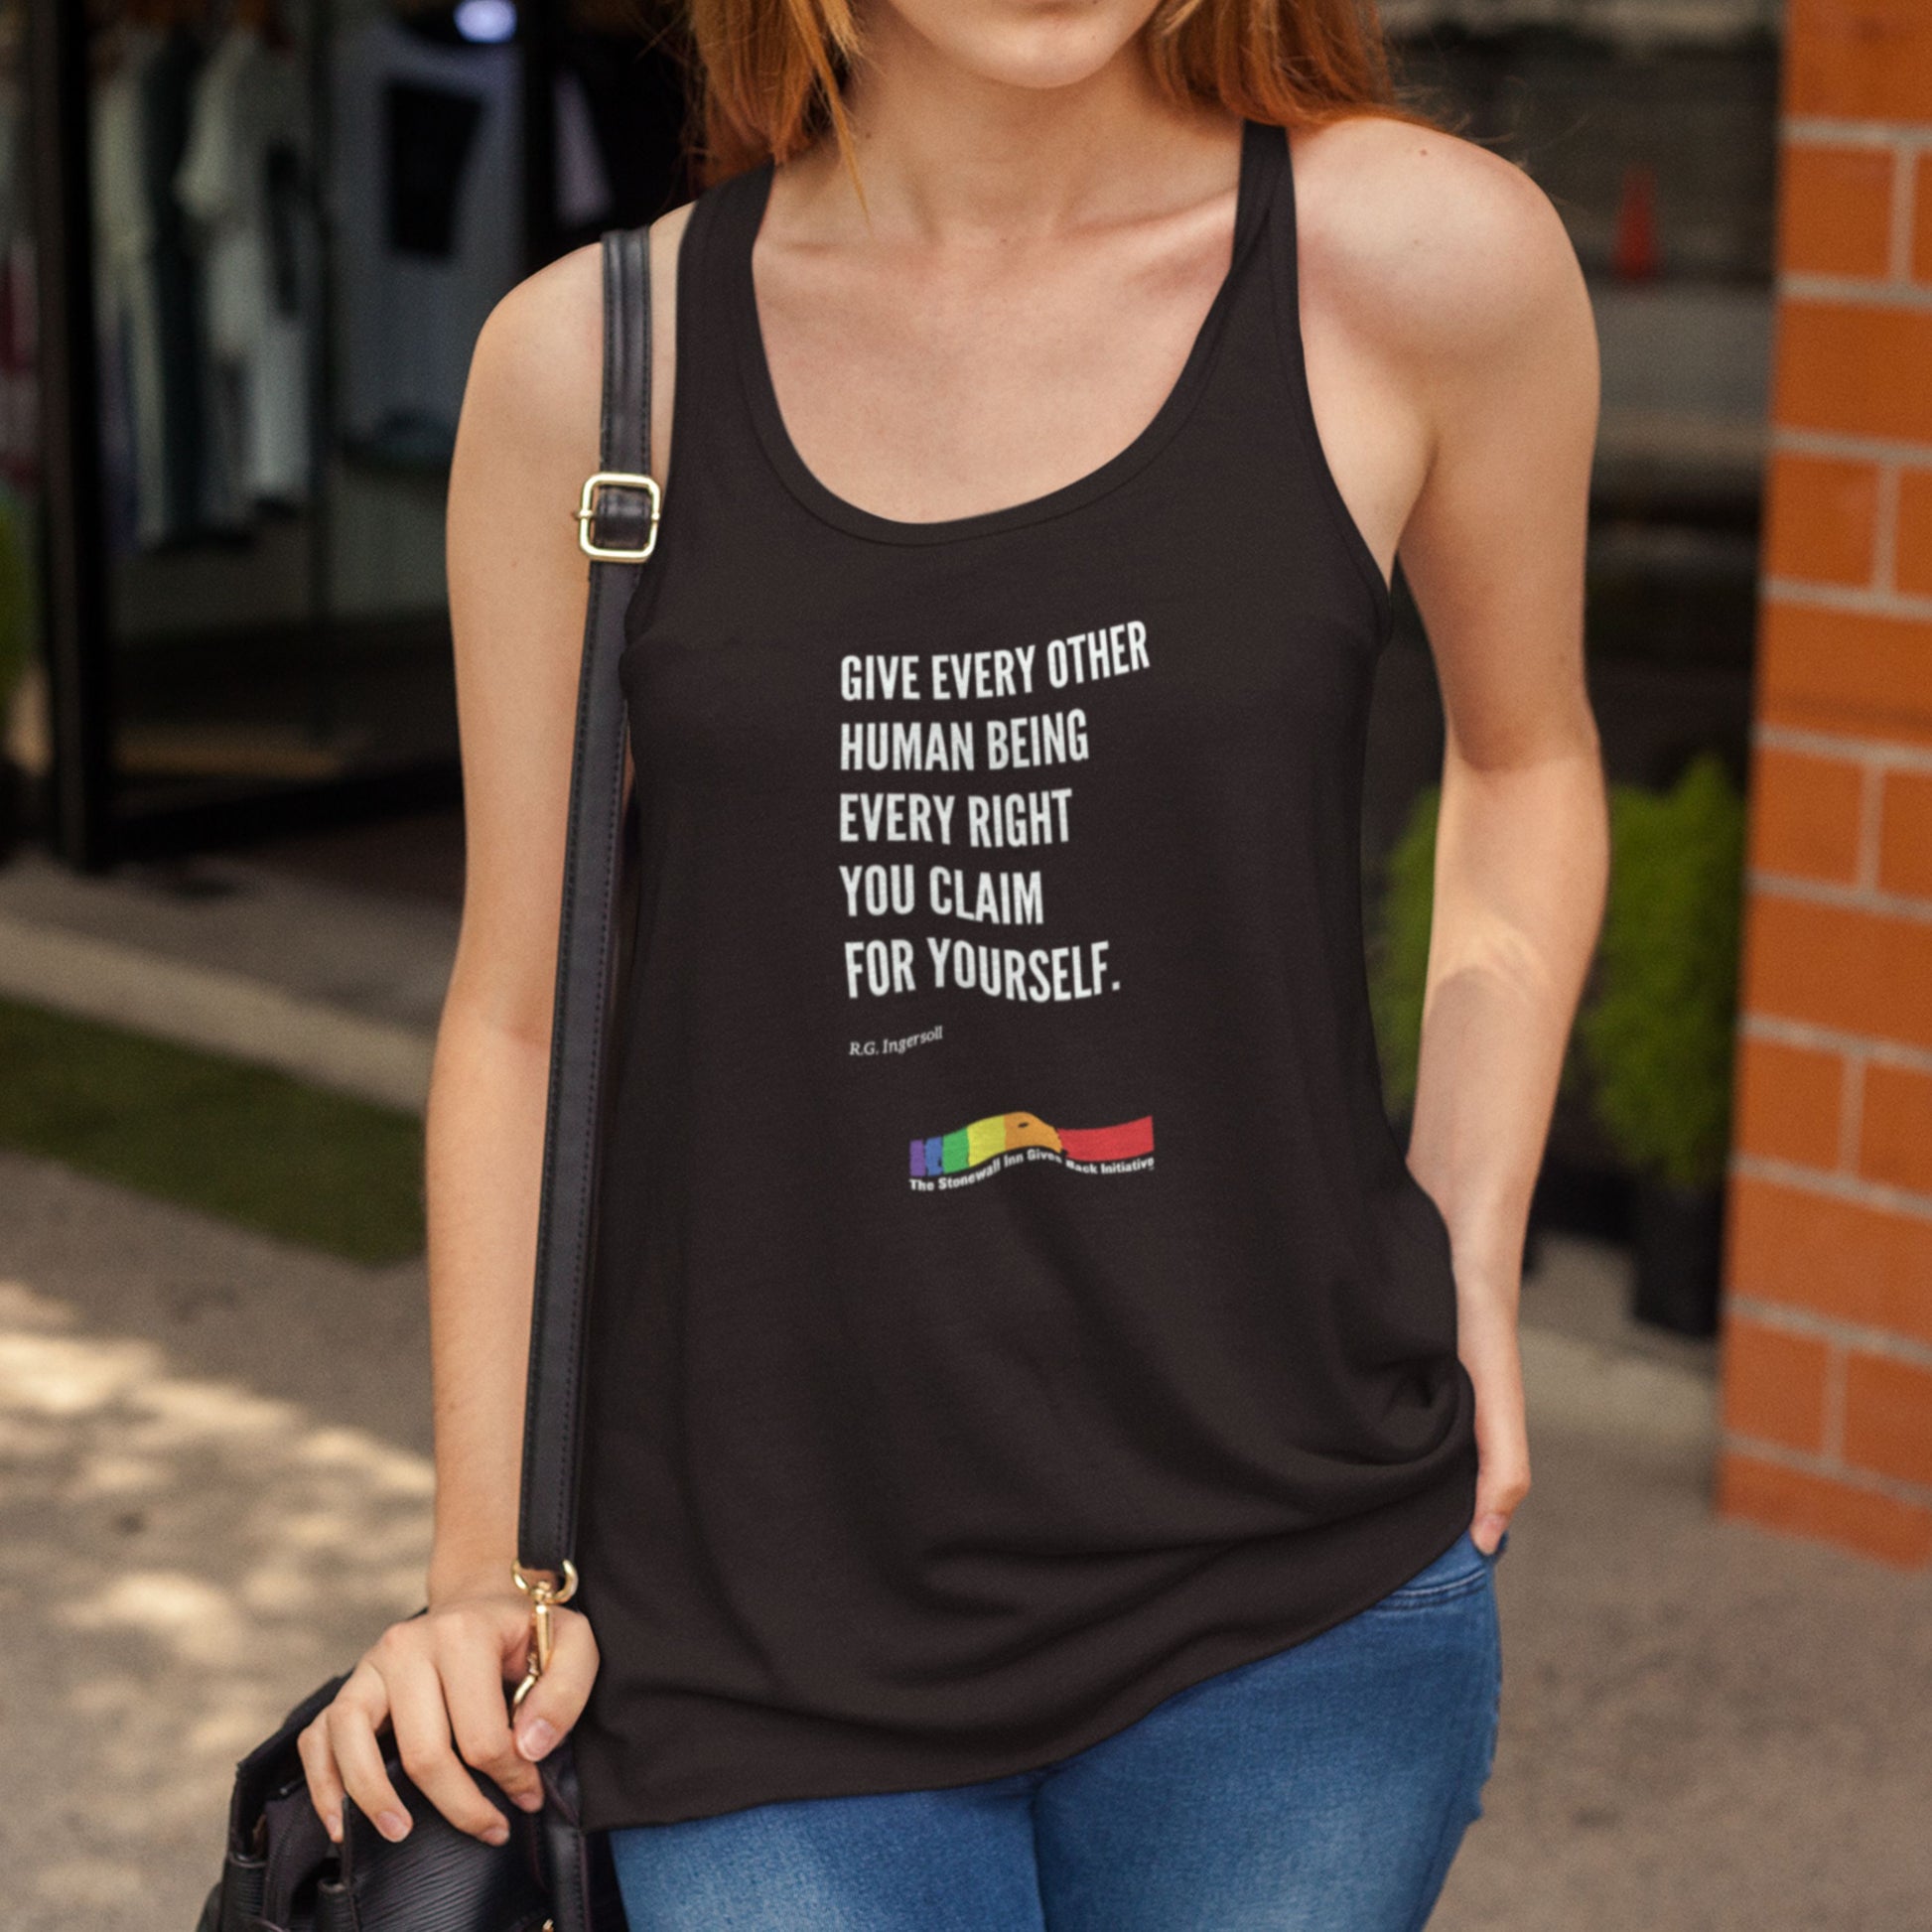 "Give Every Other Human Being Every Right You Claim For Yourself" LGBTQ+ Support Flowy Tank in Black